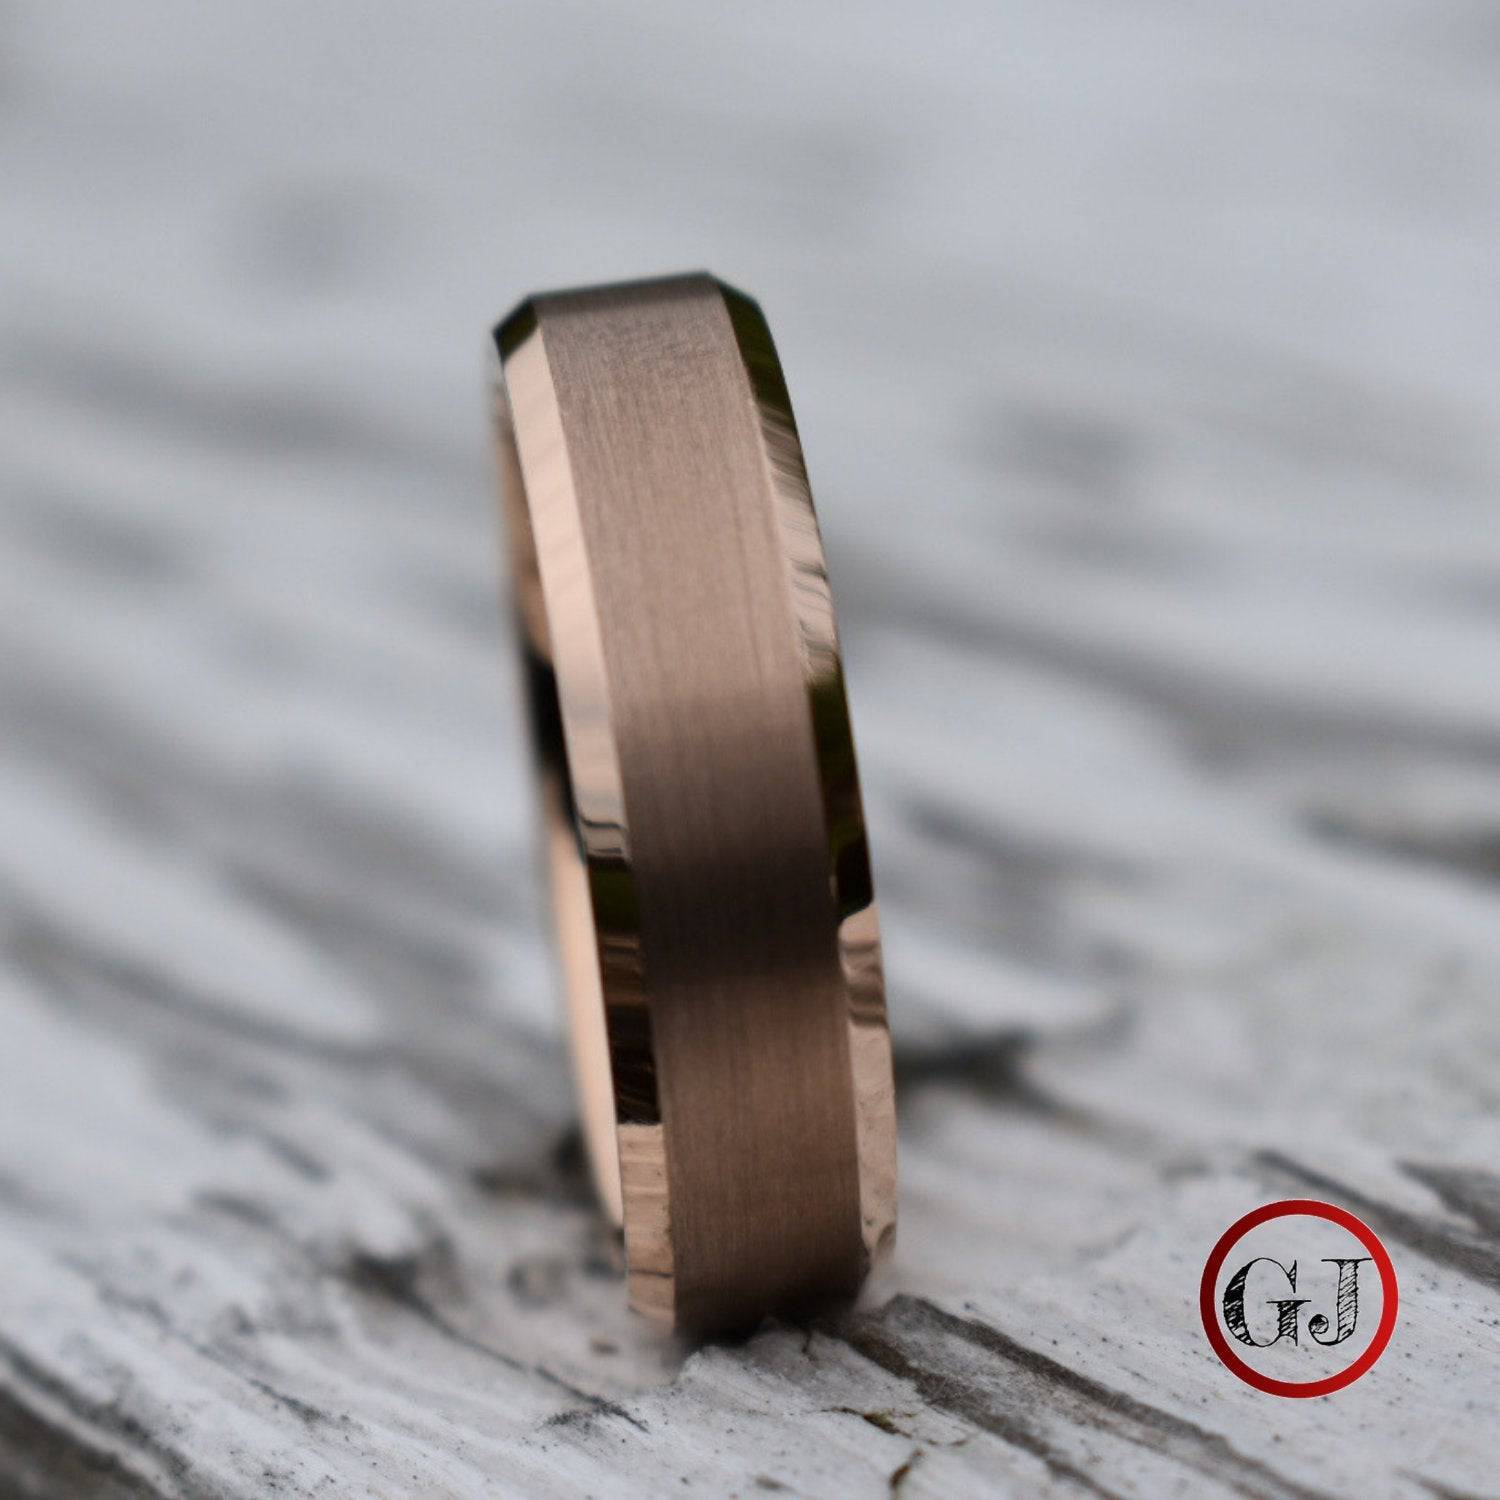 Tungsten Ring 6mm Brushed Rose Gold with Beveled Edge - Tungsten Titans